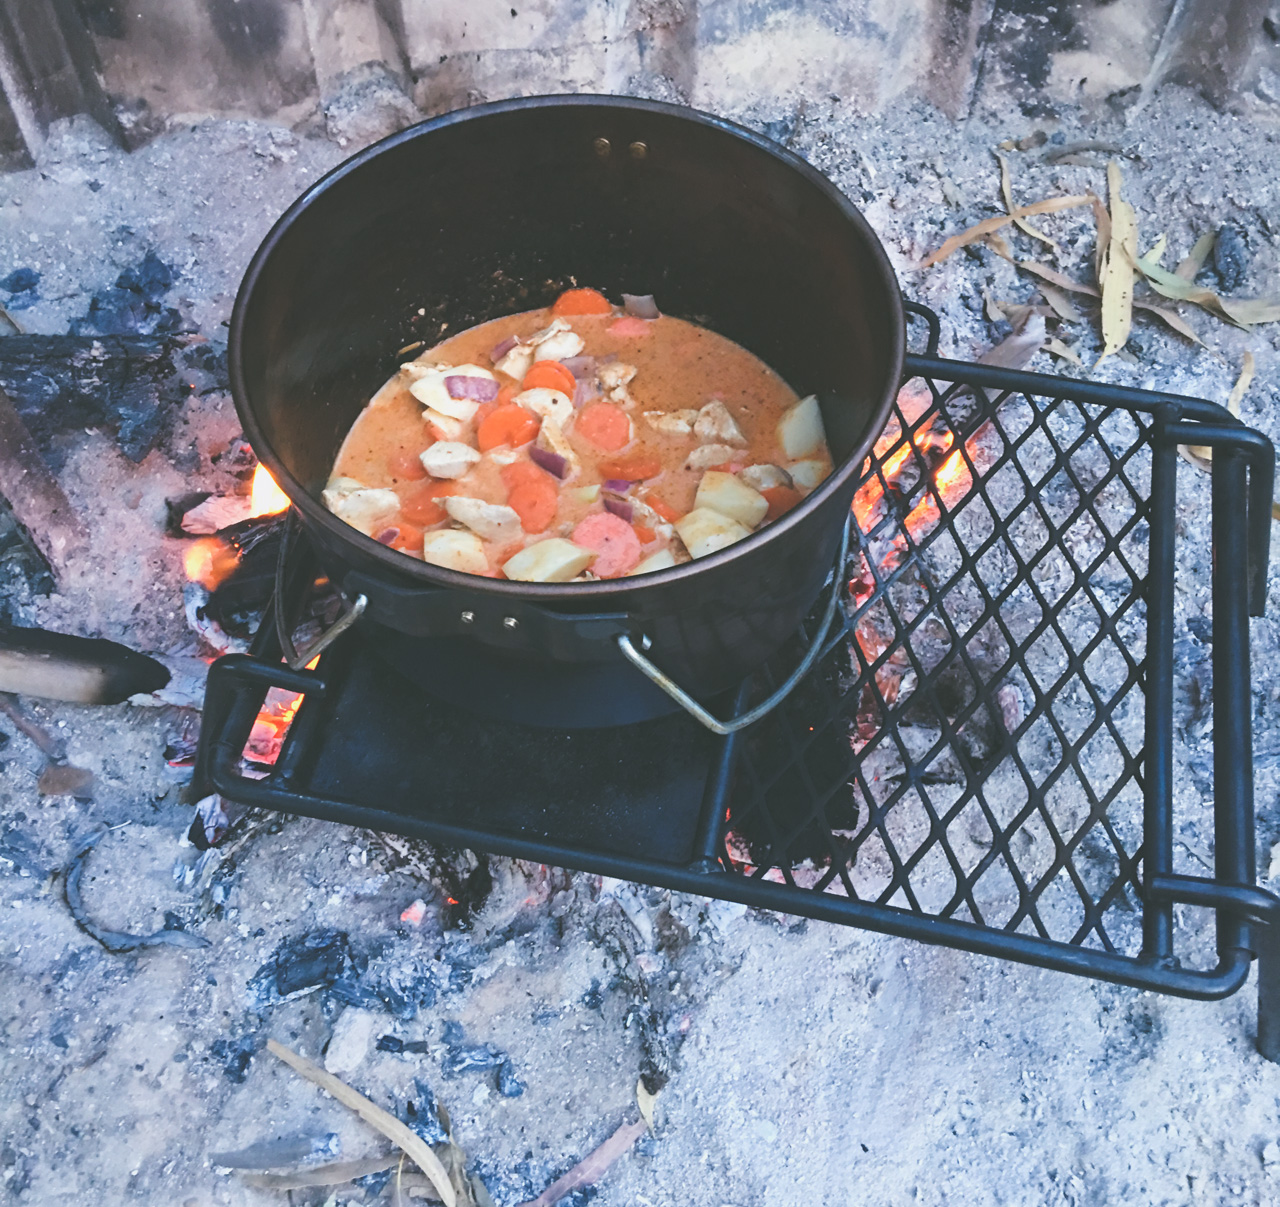 Massaman Curry In The Camp Oven At Trilby Station On The Banks Of The Darling River